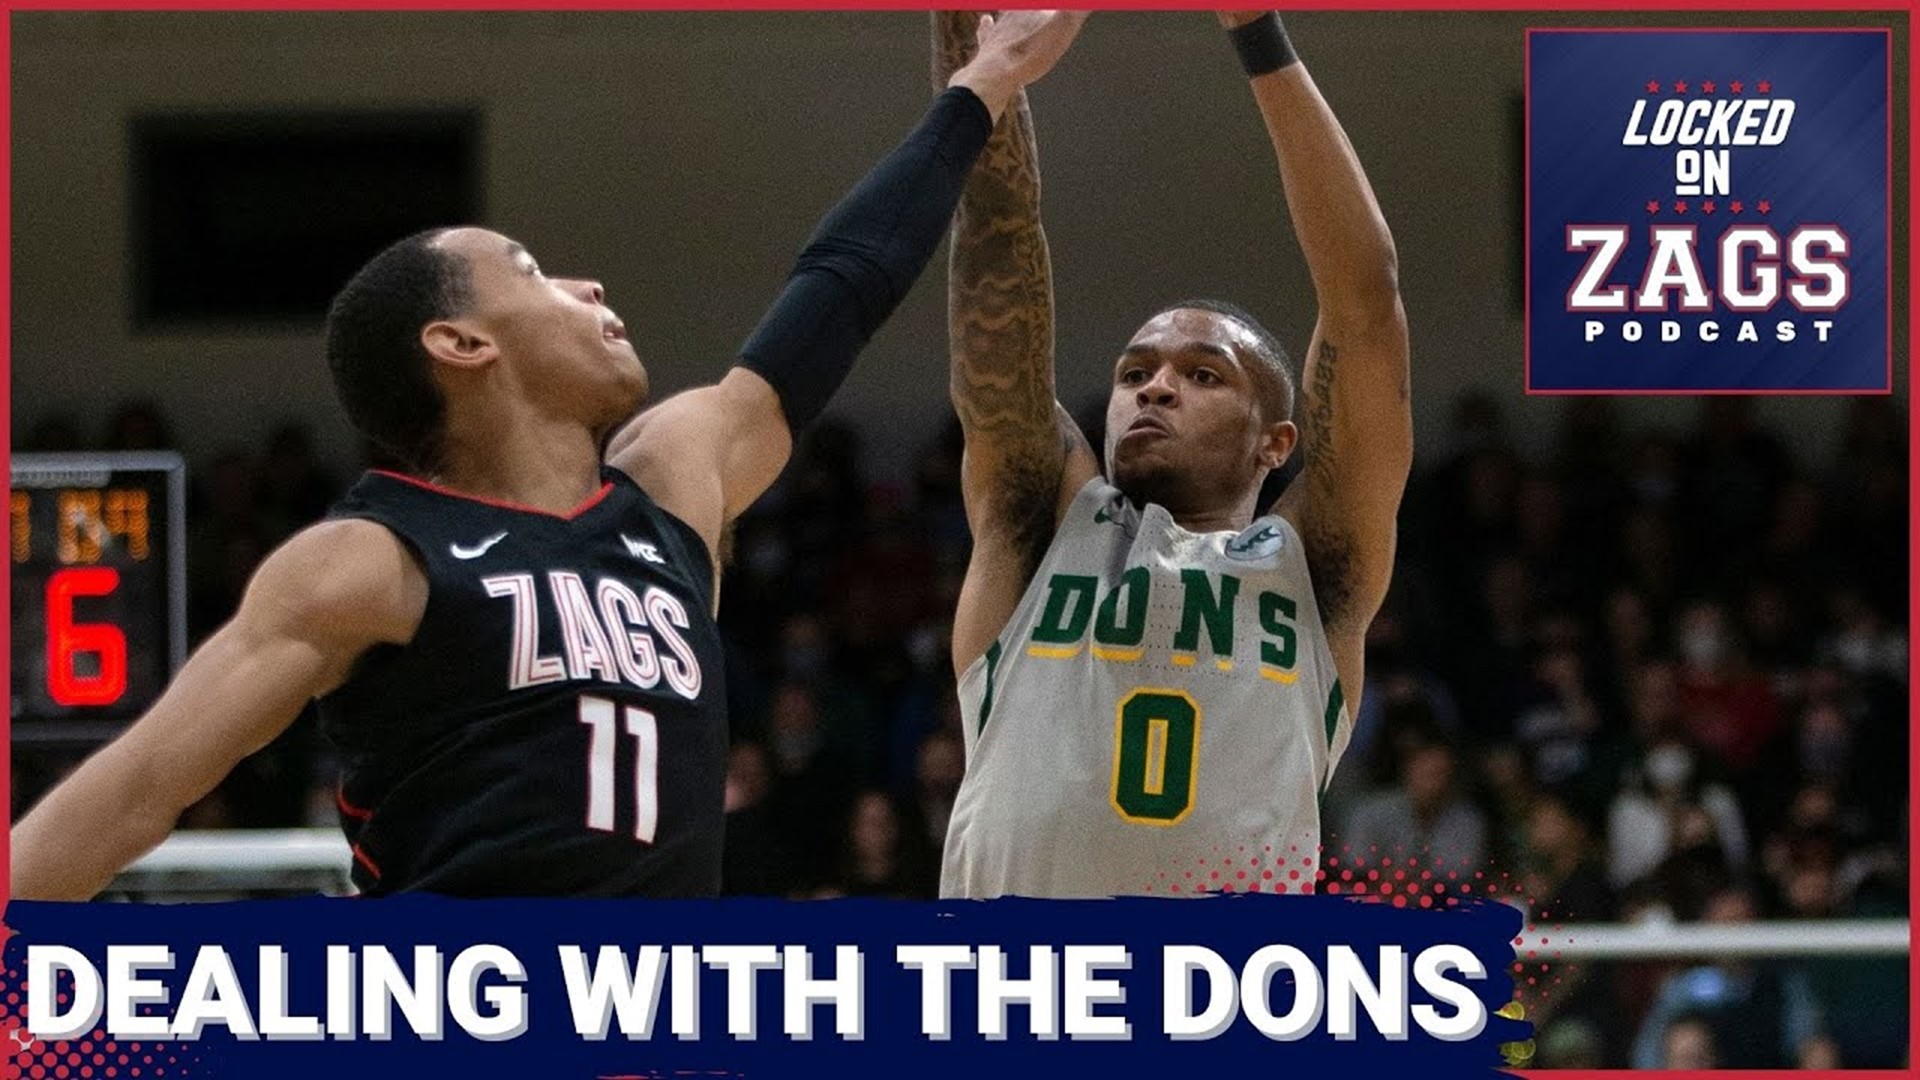 The Gonzaga Bulldogs head to War Memorial gym in San Francisco to take on a Dons team that is extra motivated after dropping their first two WCC games of the year.